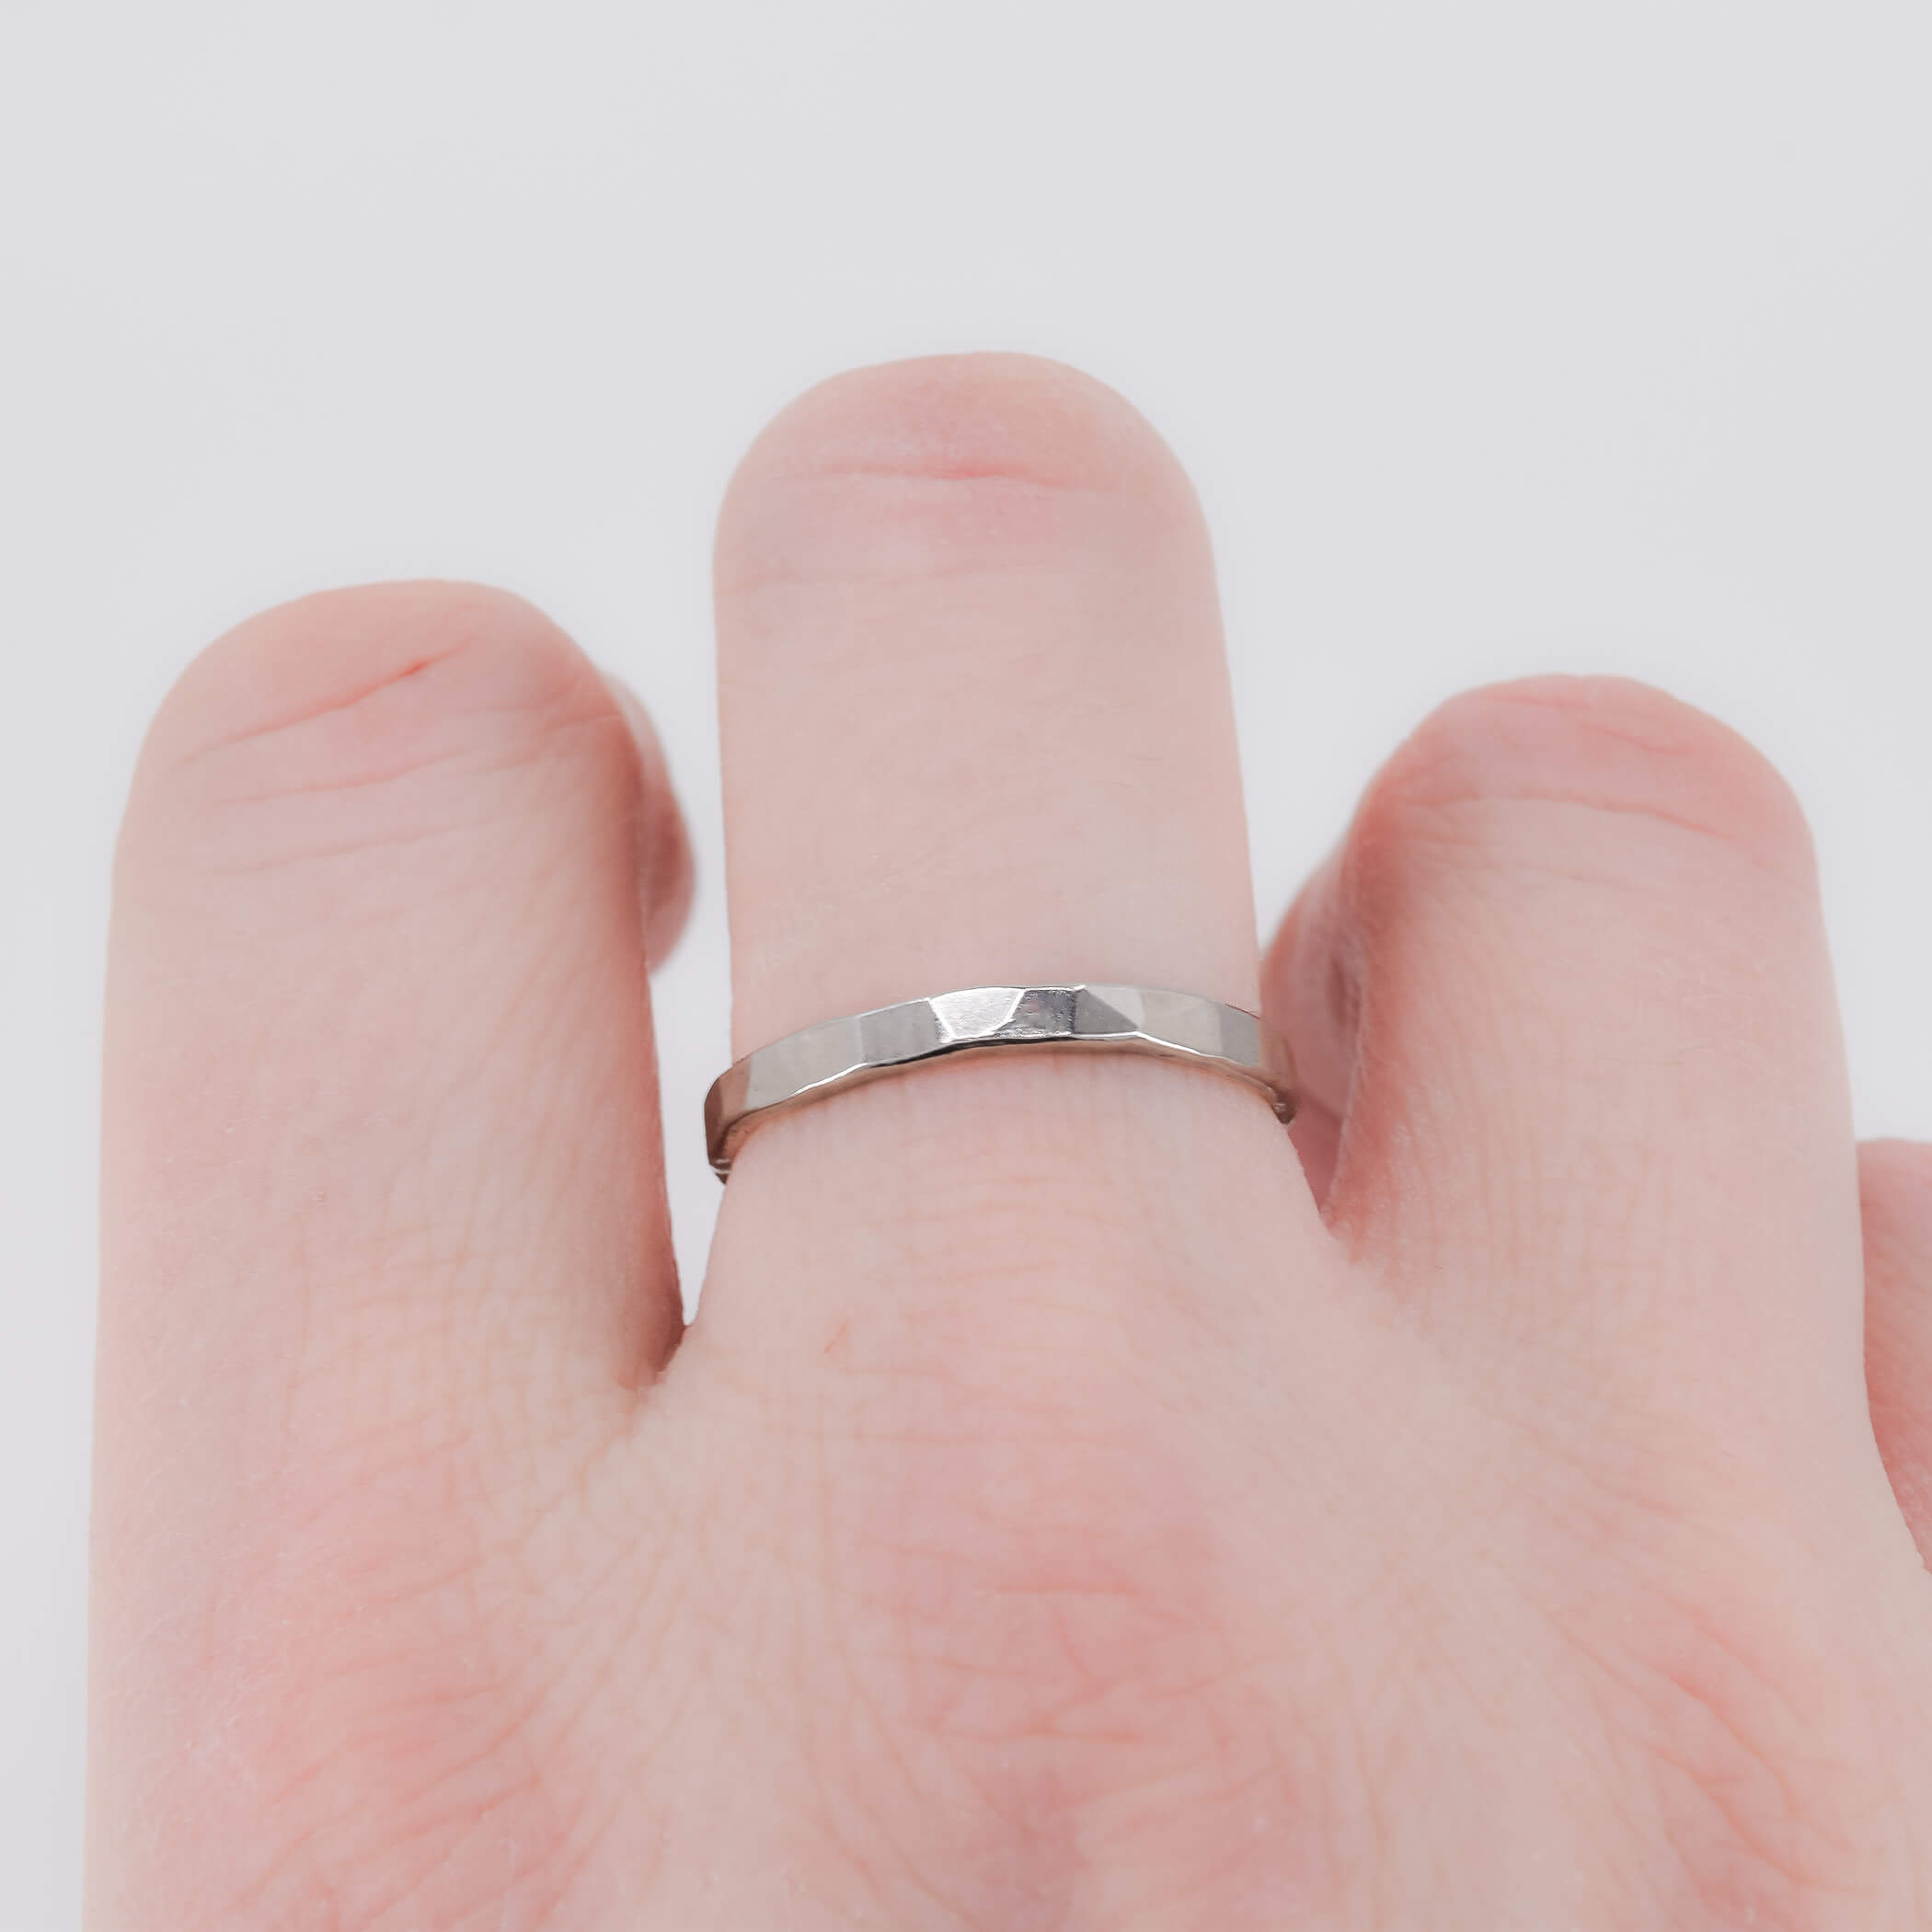 Faceted stacking ring in sterling silver worn on finger